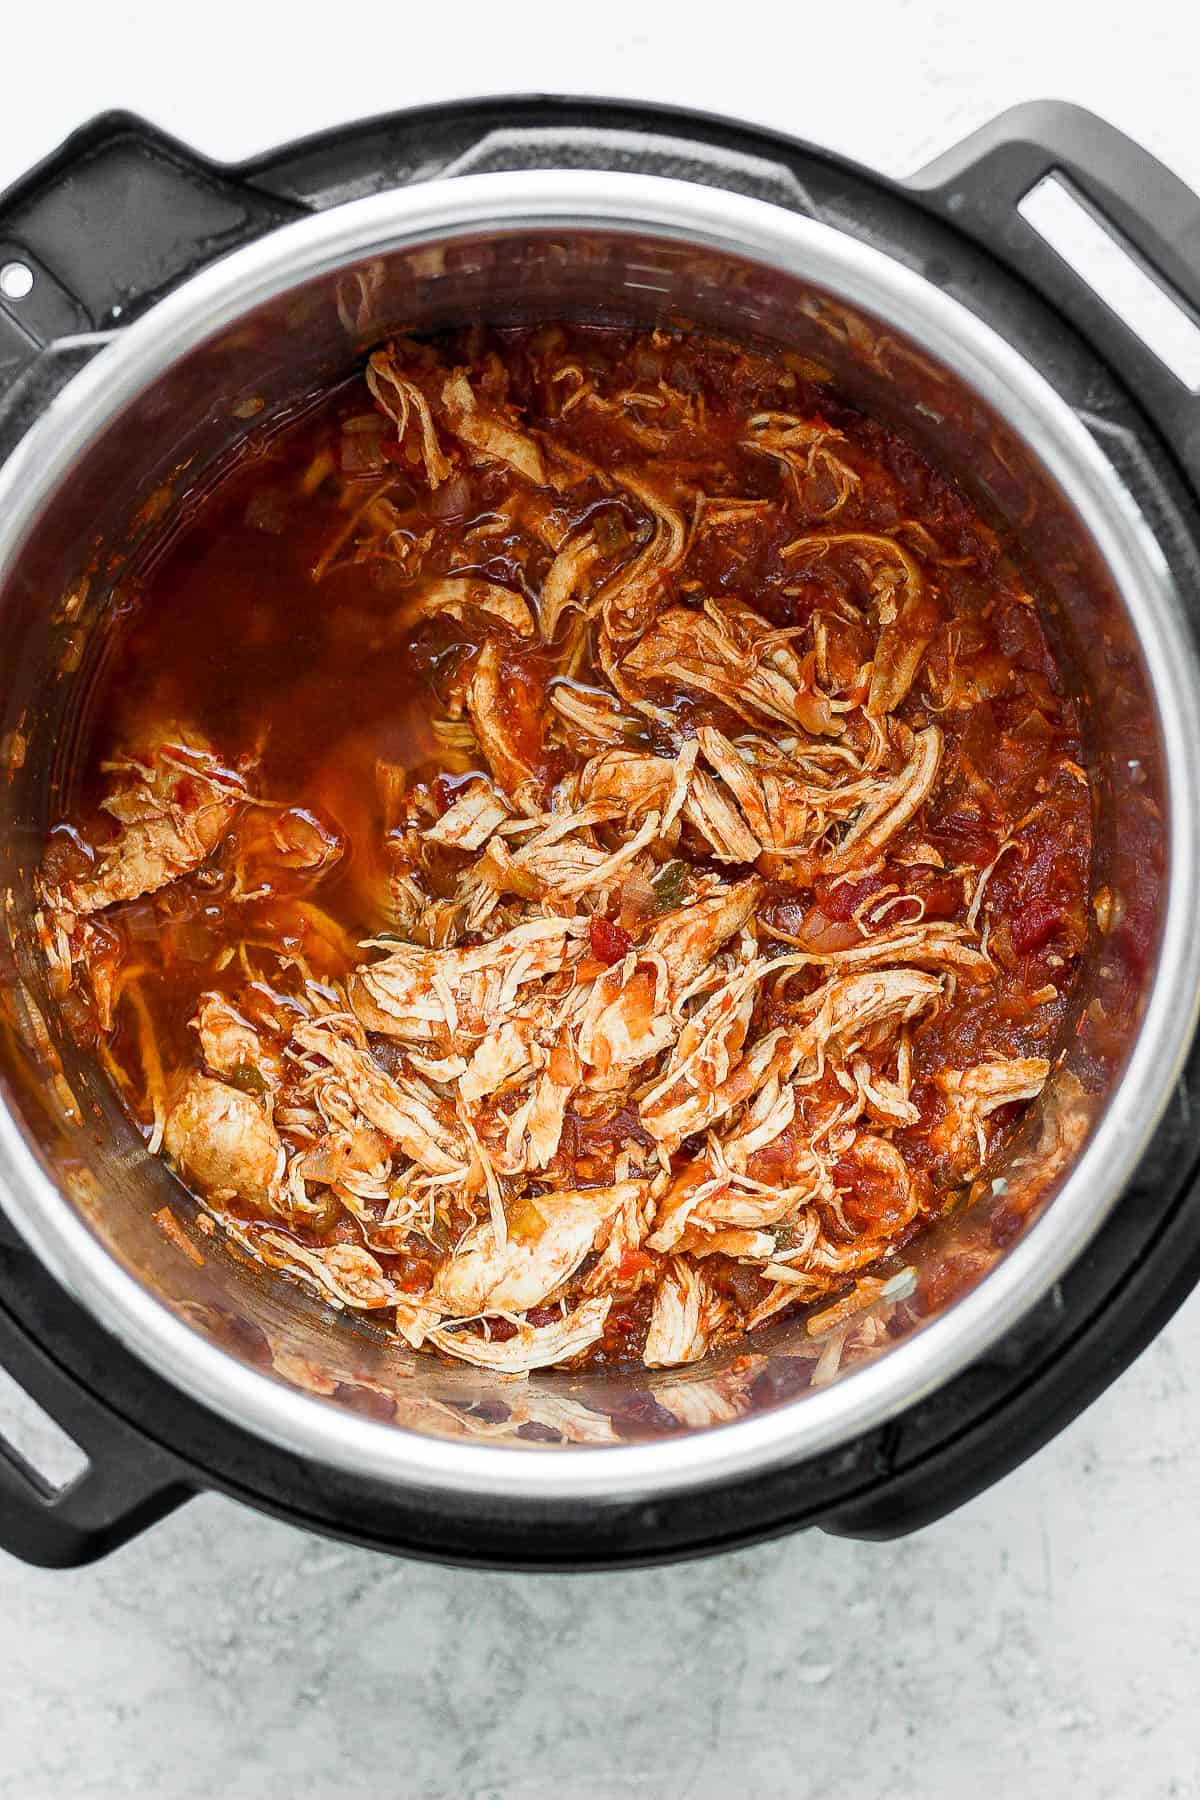 The salsa mixture mixed in with the shredded chicken in the instant pot. 